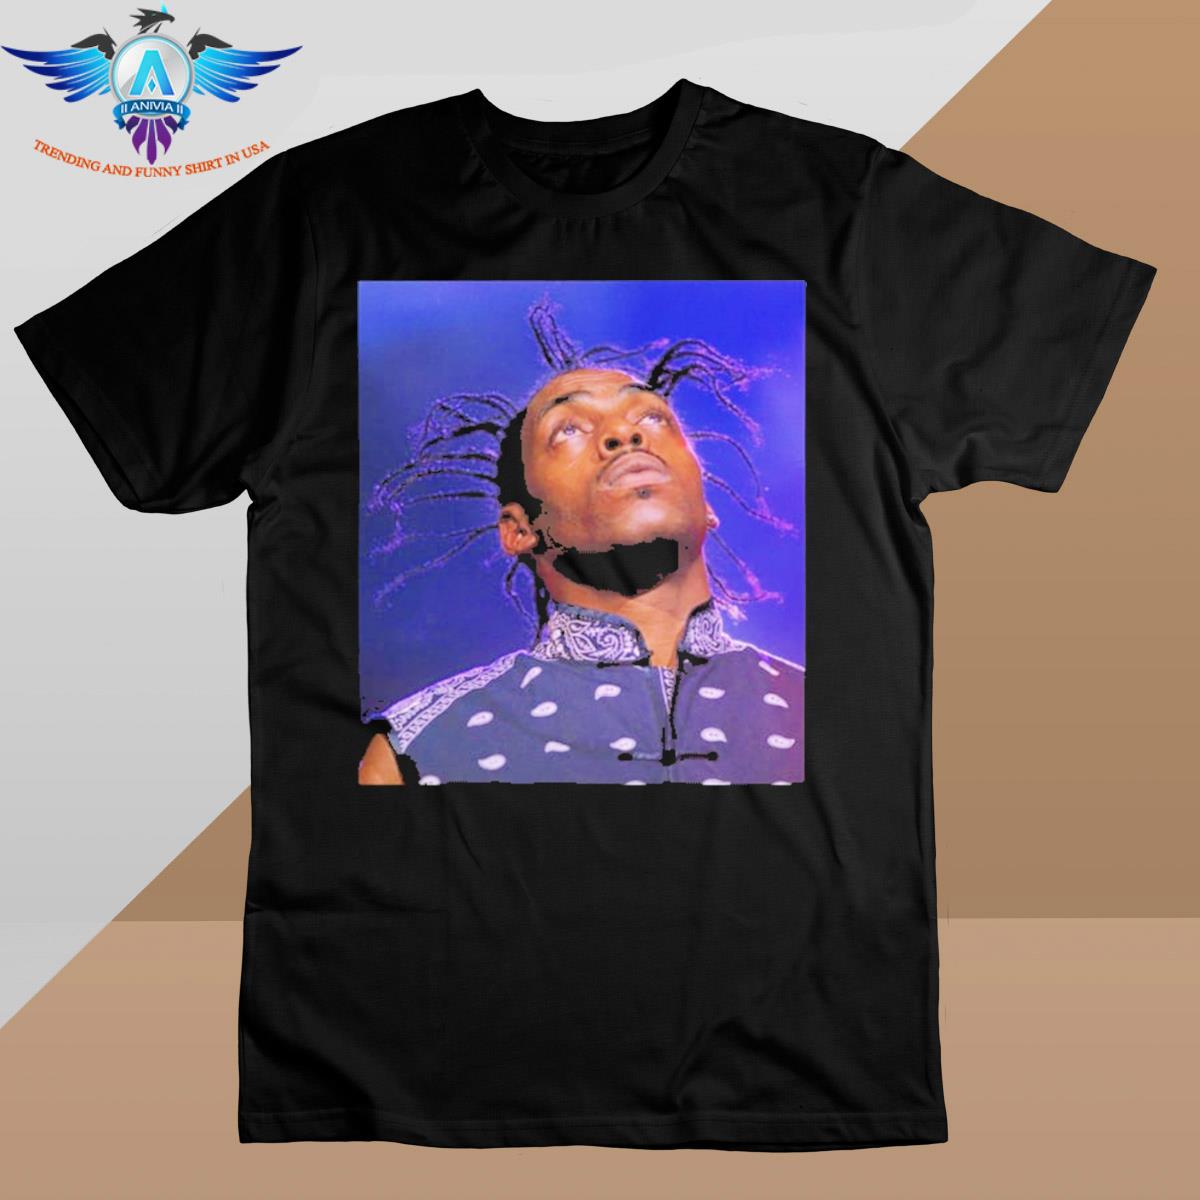 Rest in peace Coolio Gangsta Paradise 1963 - 2022 shirt